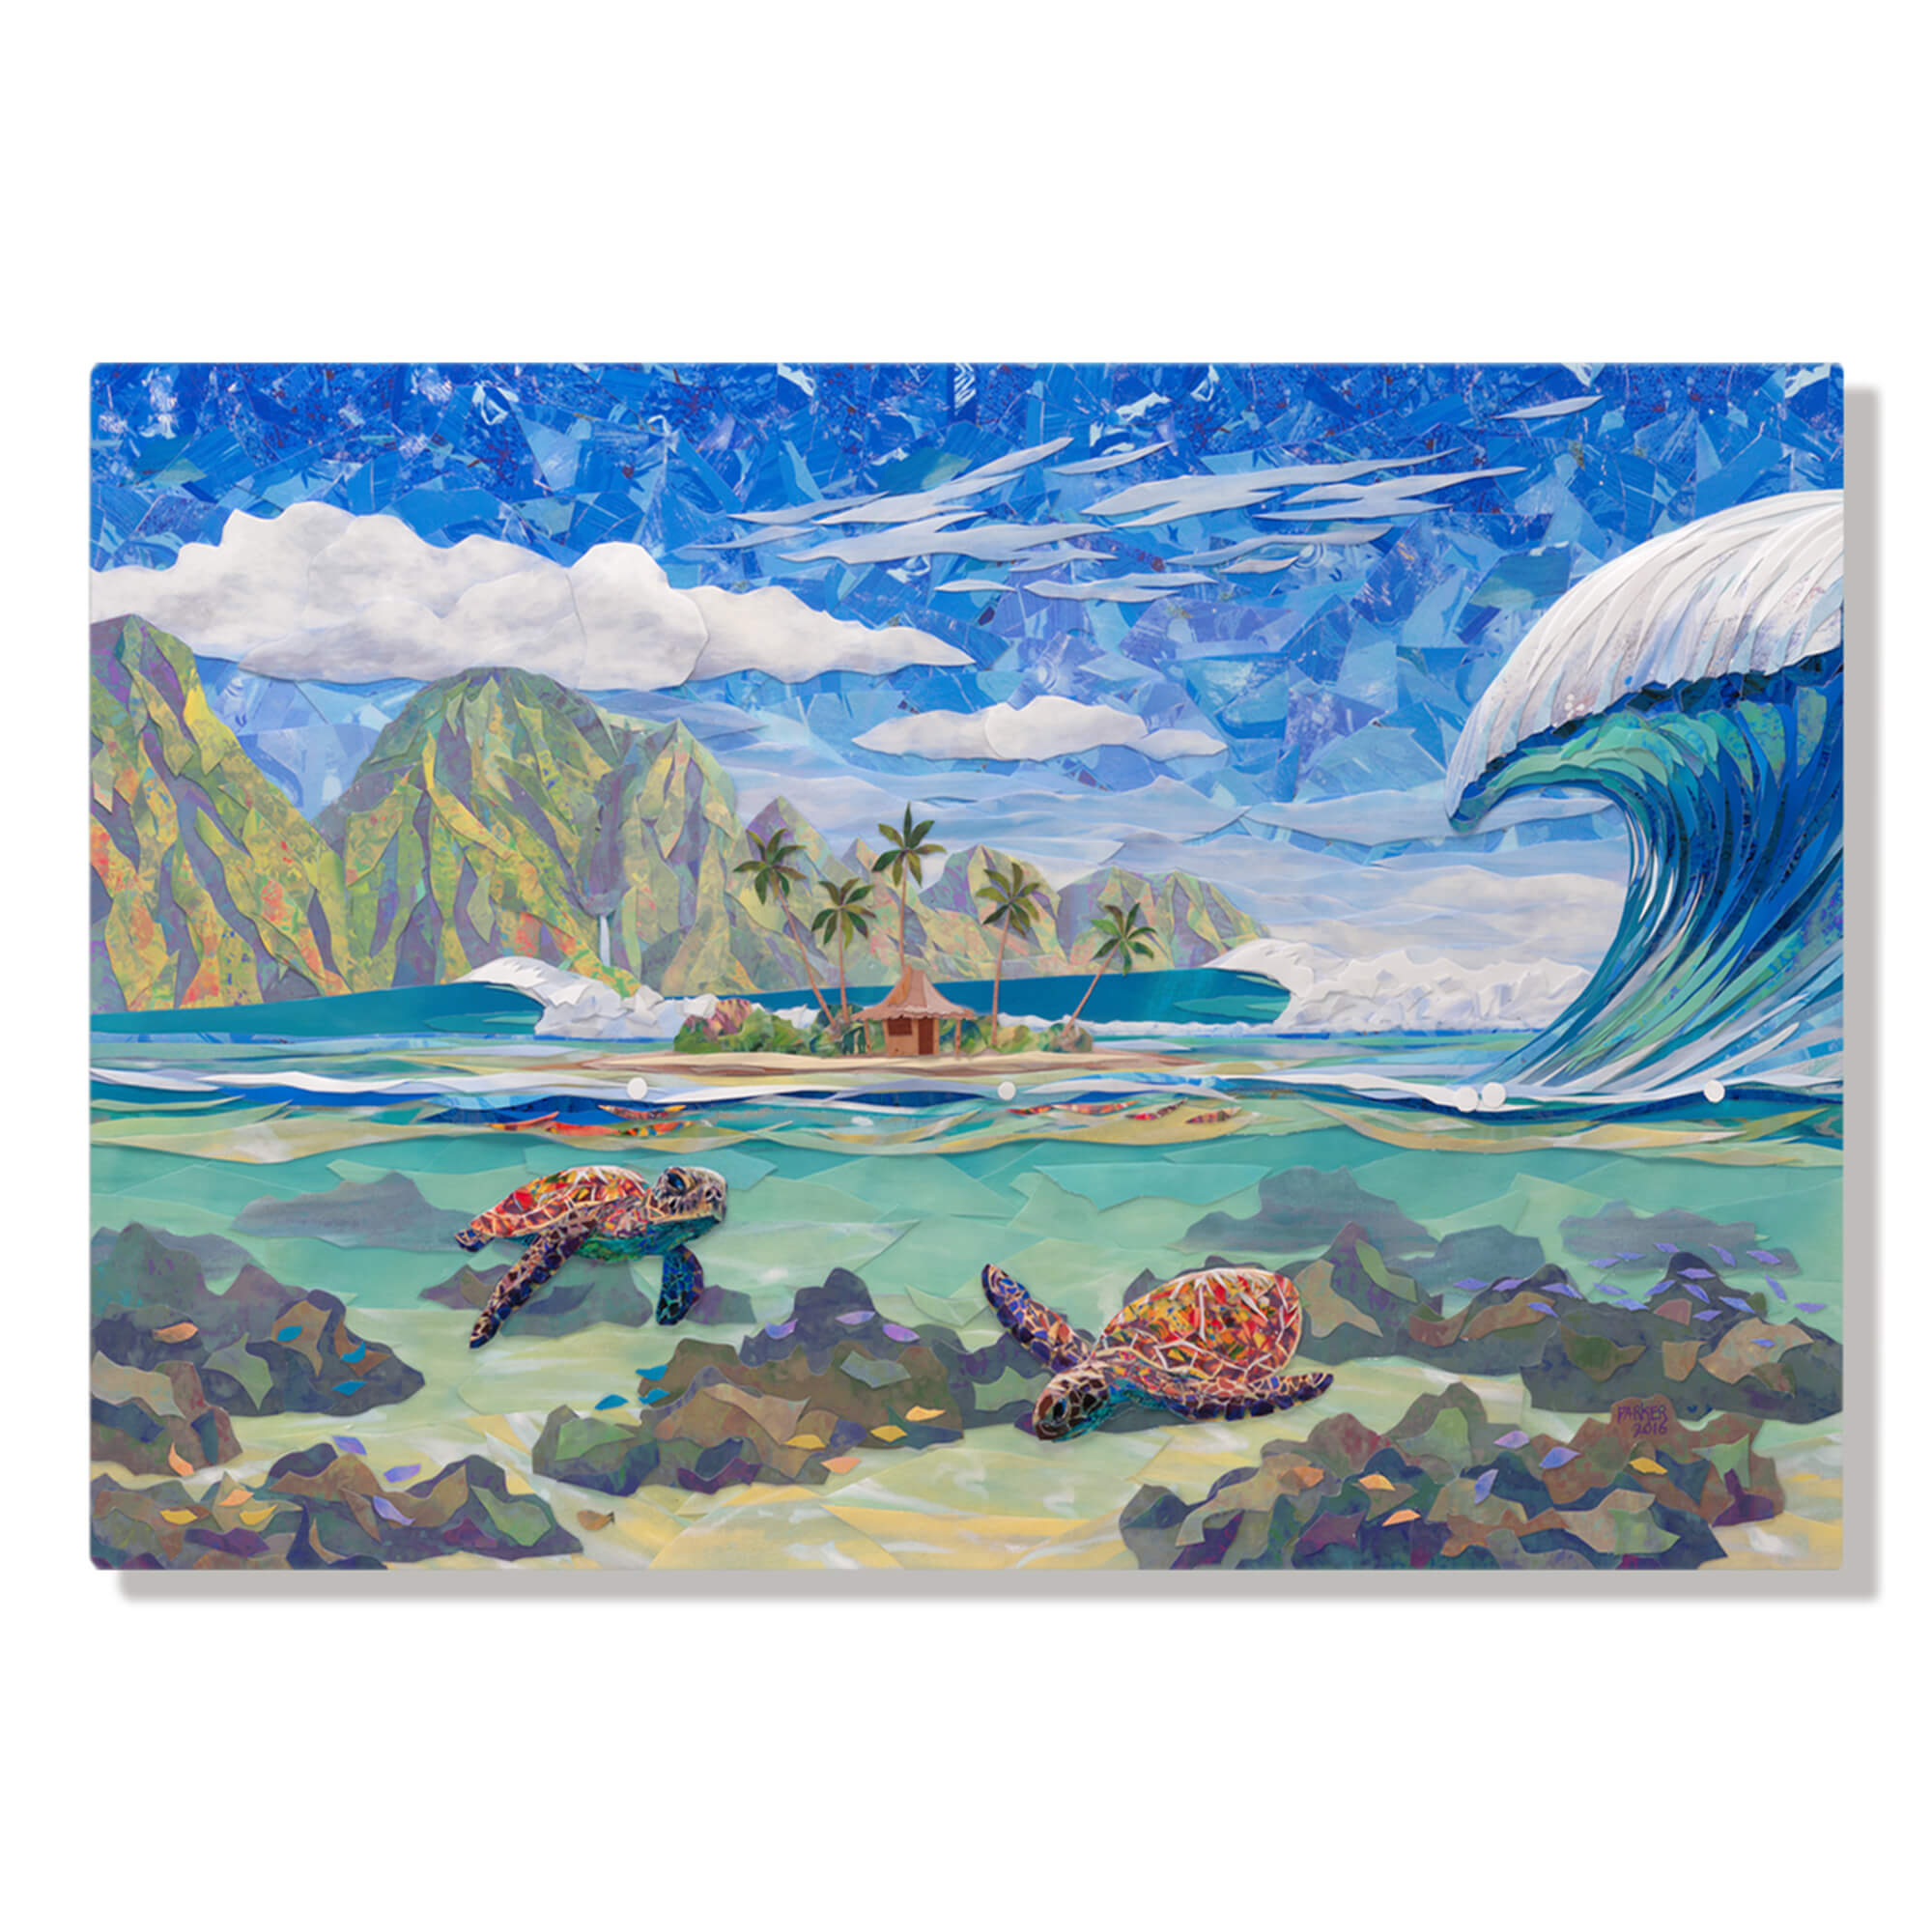 A metal art print featuring a collage of a tranquil seascape with two swimming sea turtles a hut on an island, a huge crashing wave, and a mountain background, by Maui artist Patrick Parker